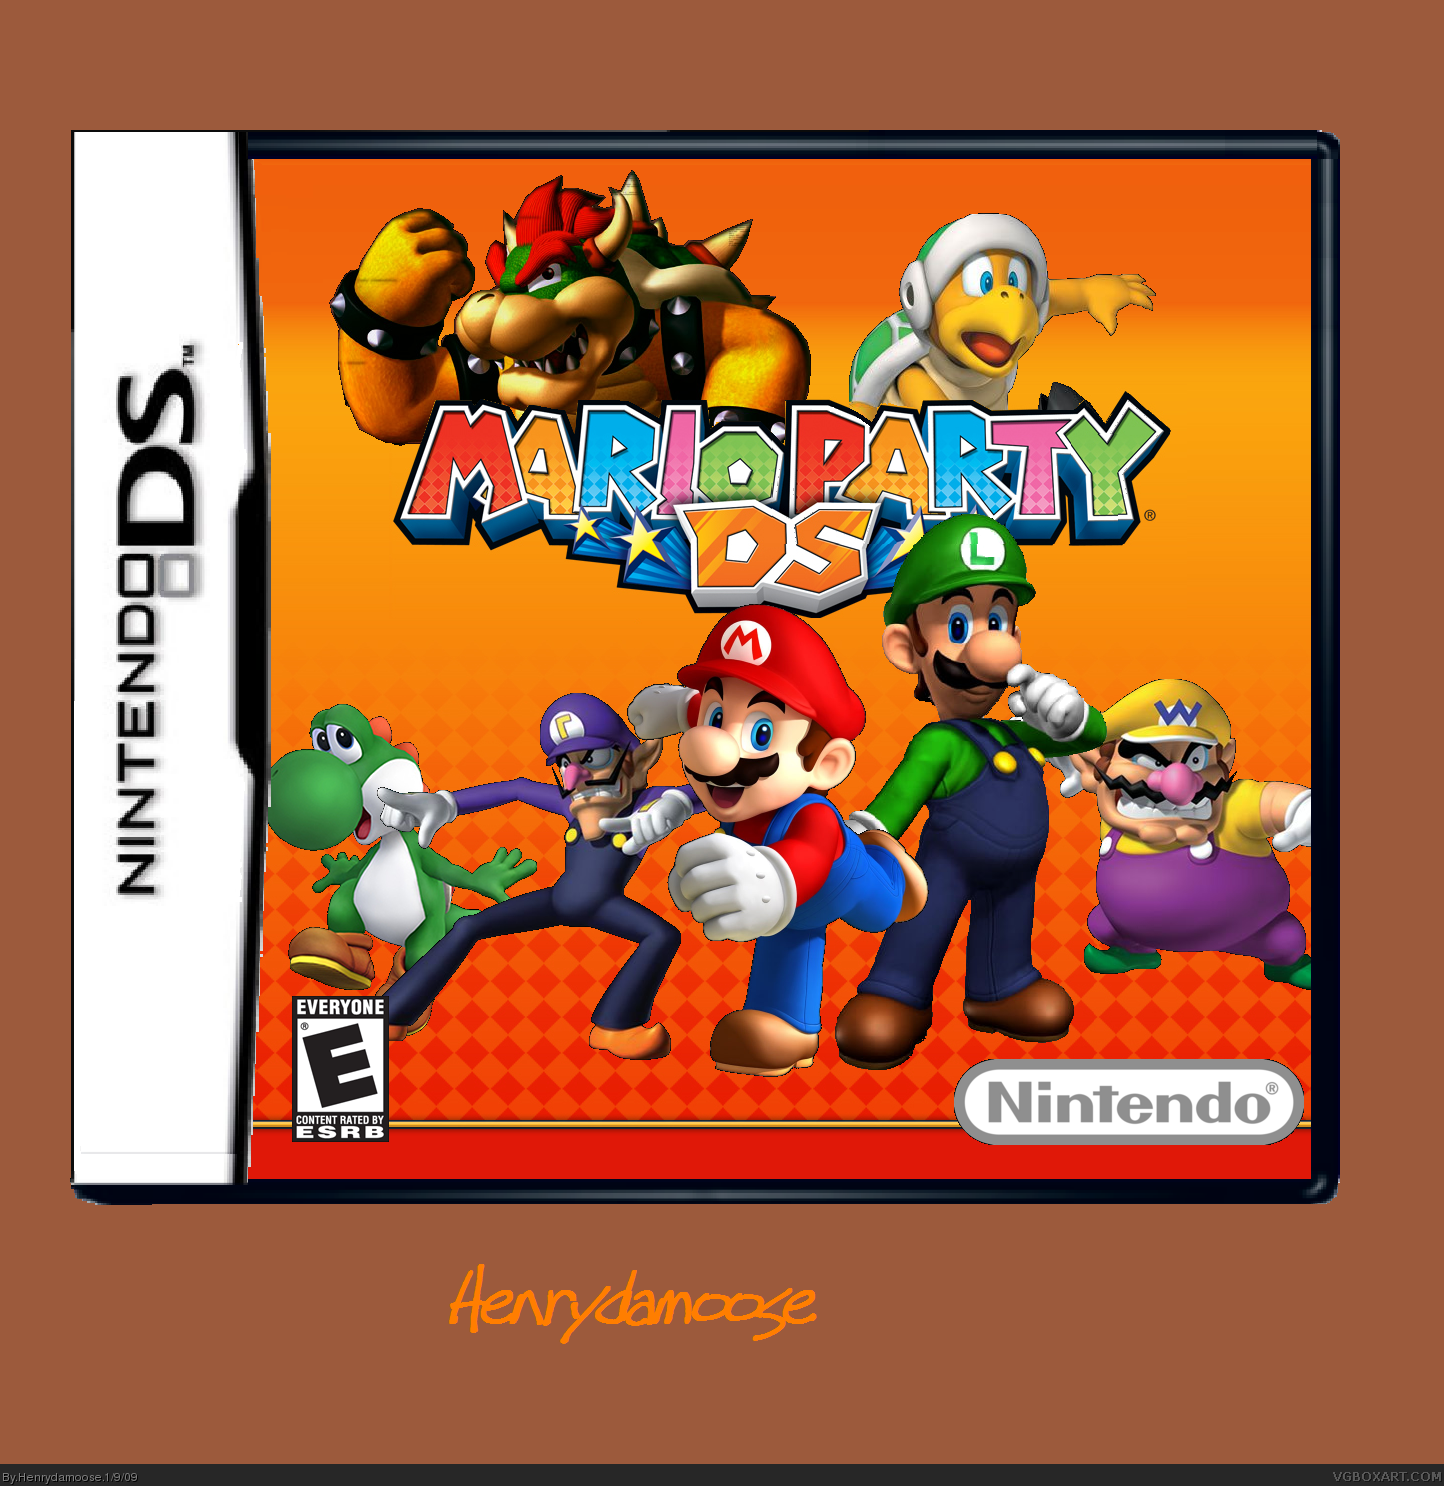 Mario Party DS box cover